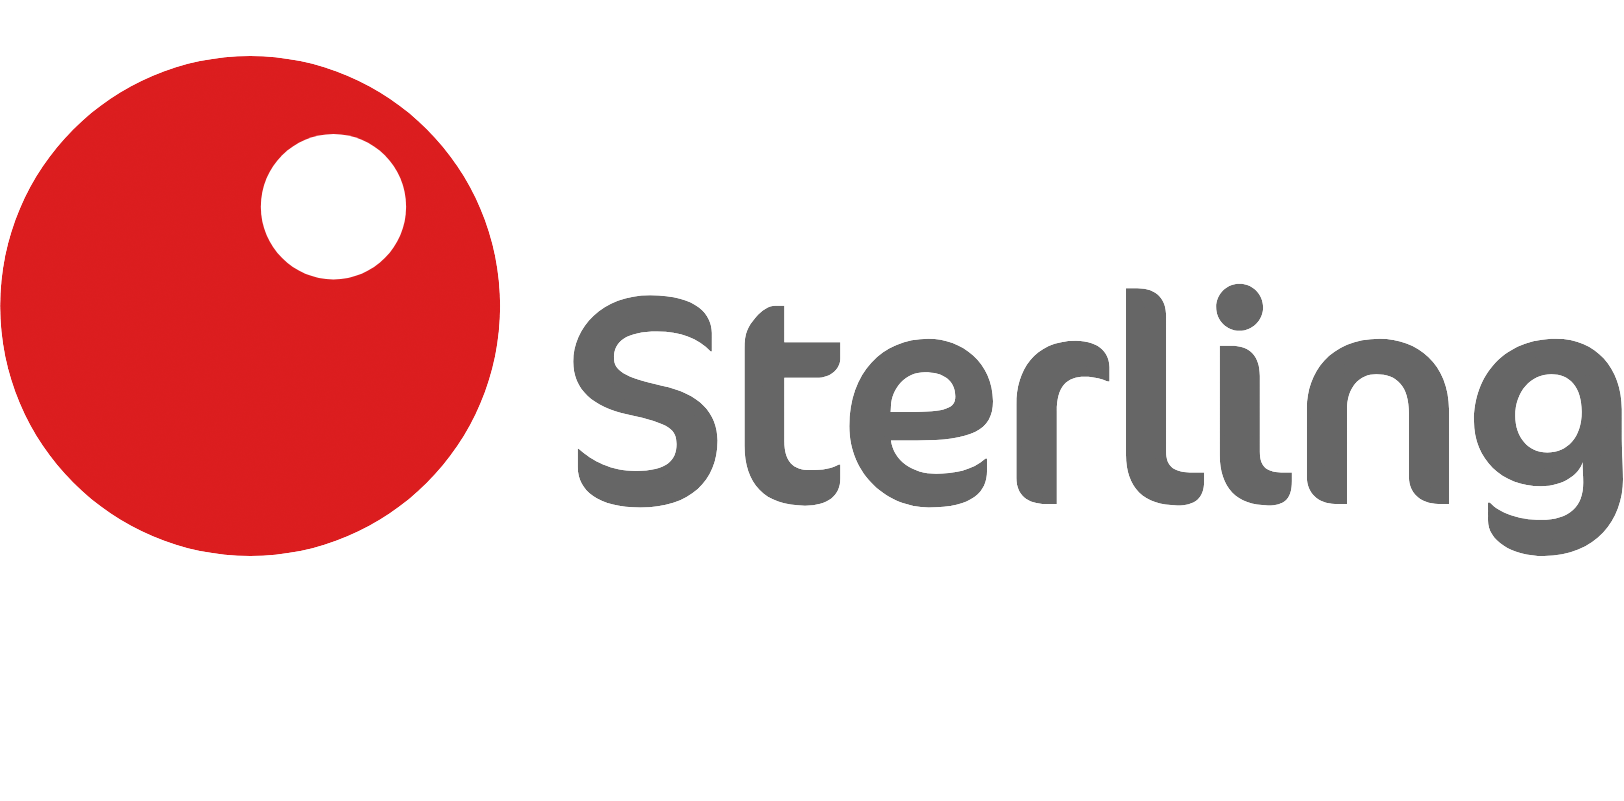 Sterling Bank Recruitment 2022 portal for NCE, OND, HND, Bsc (32 Positions)